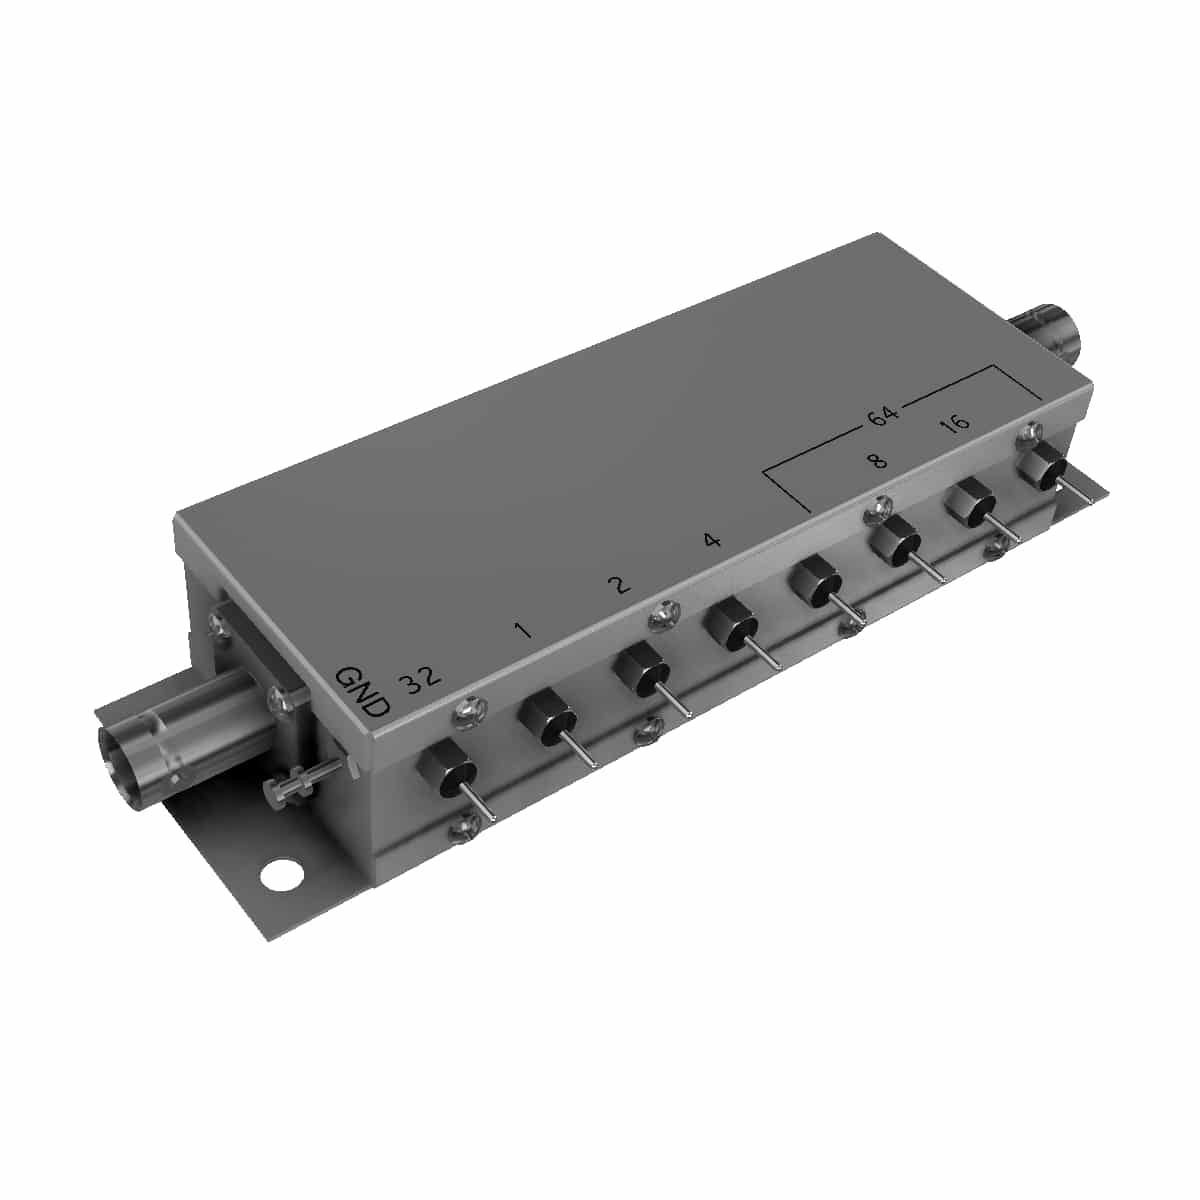 50P-0531 Relay Programmable Attenuator - JFW Industries